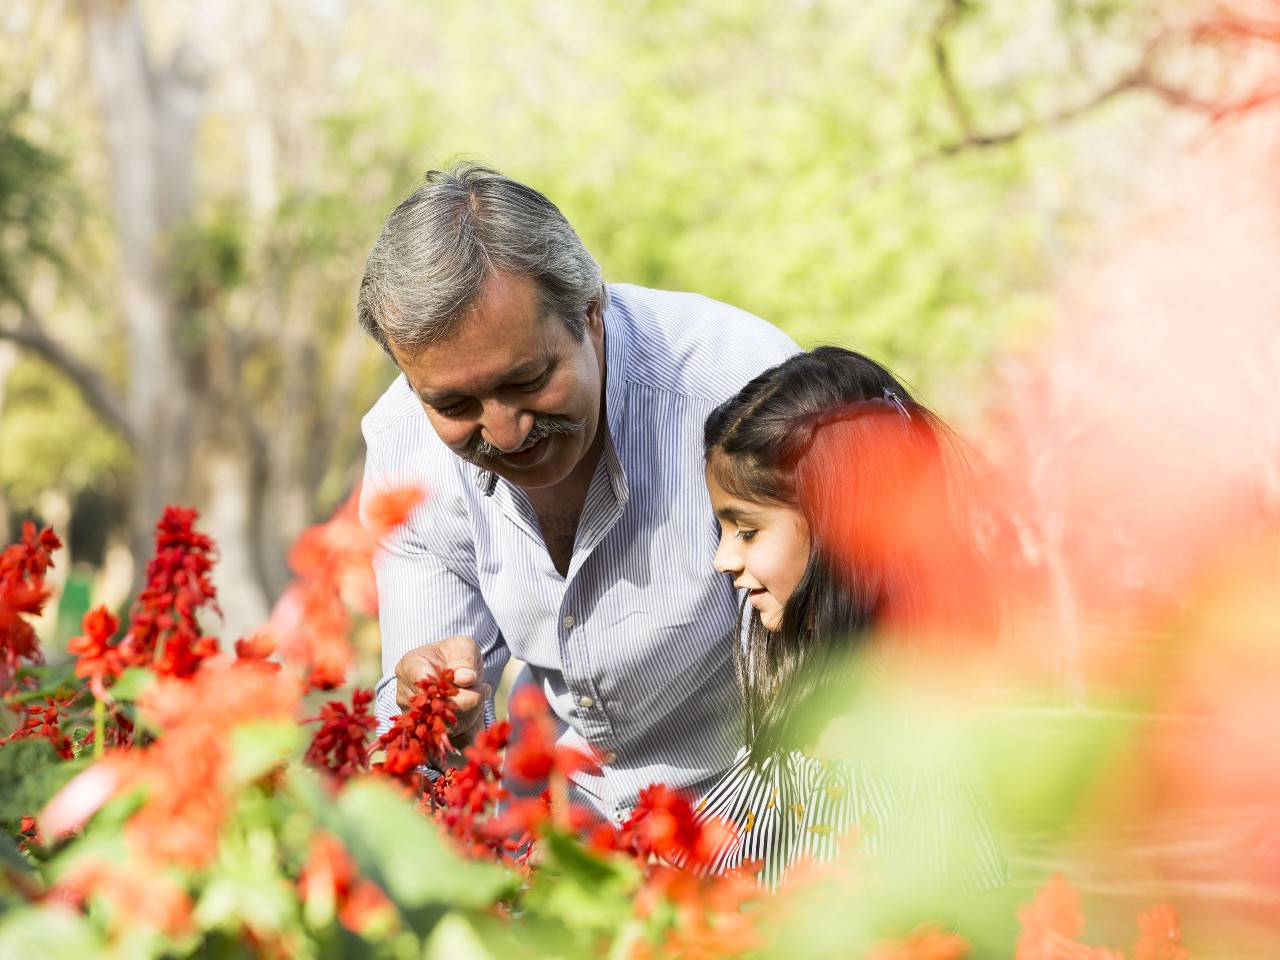 Grandfather and granddaughter playing in garden; image used for HSBC Global wealth management solutions.